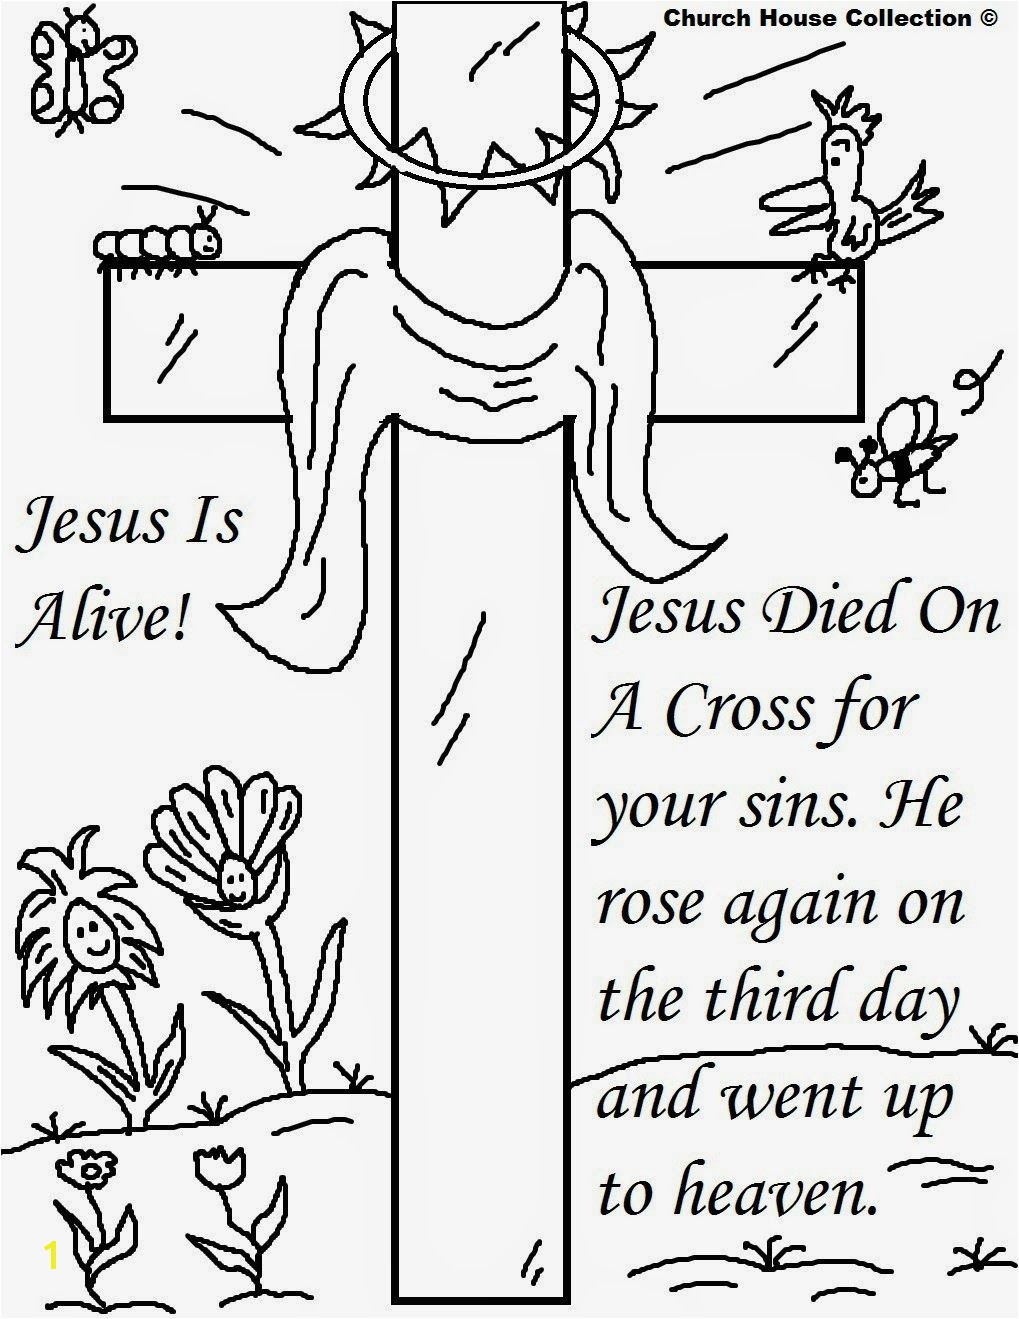 church house collection blog easter jesus resurrection coloring pages